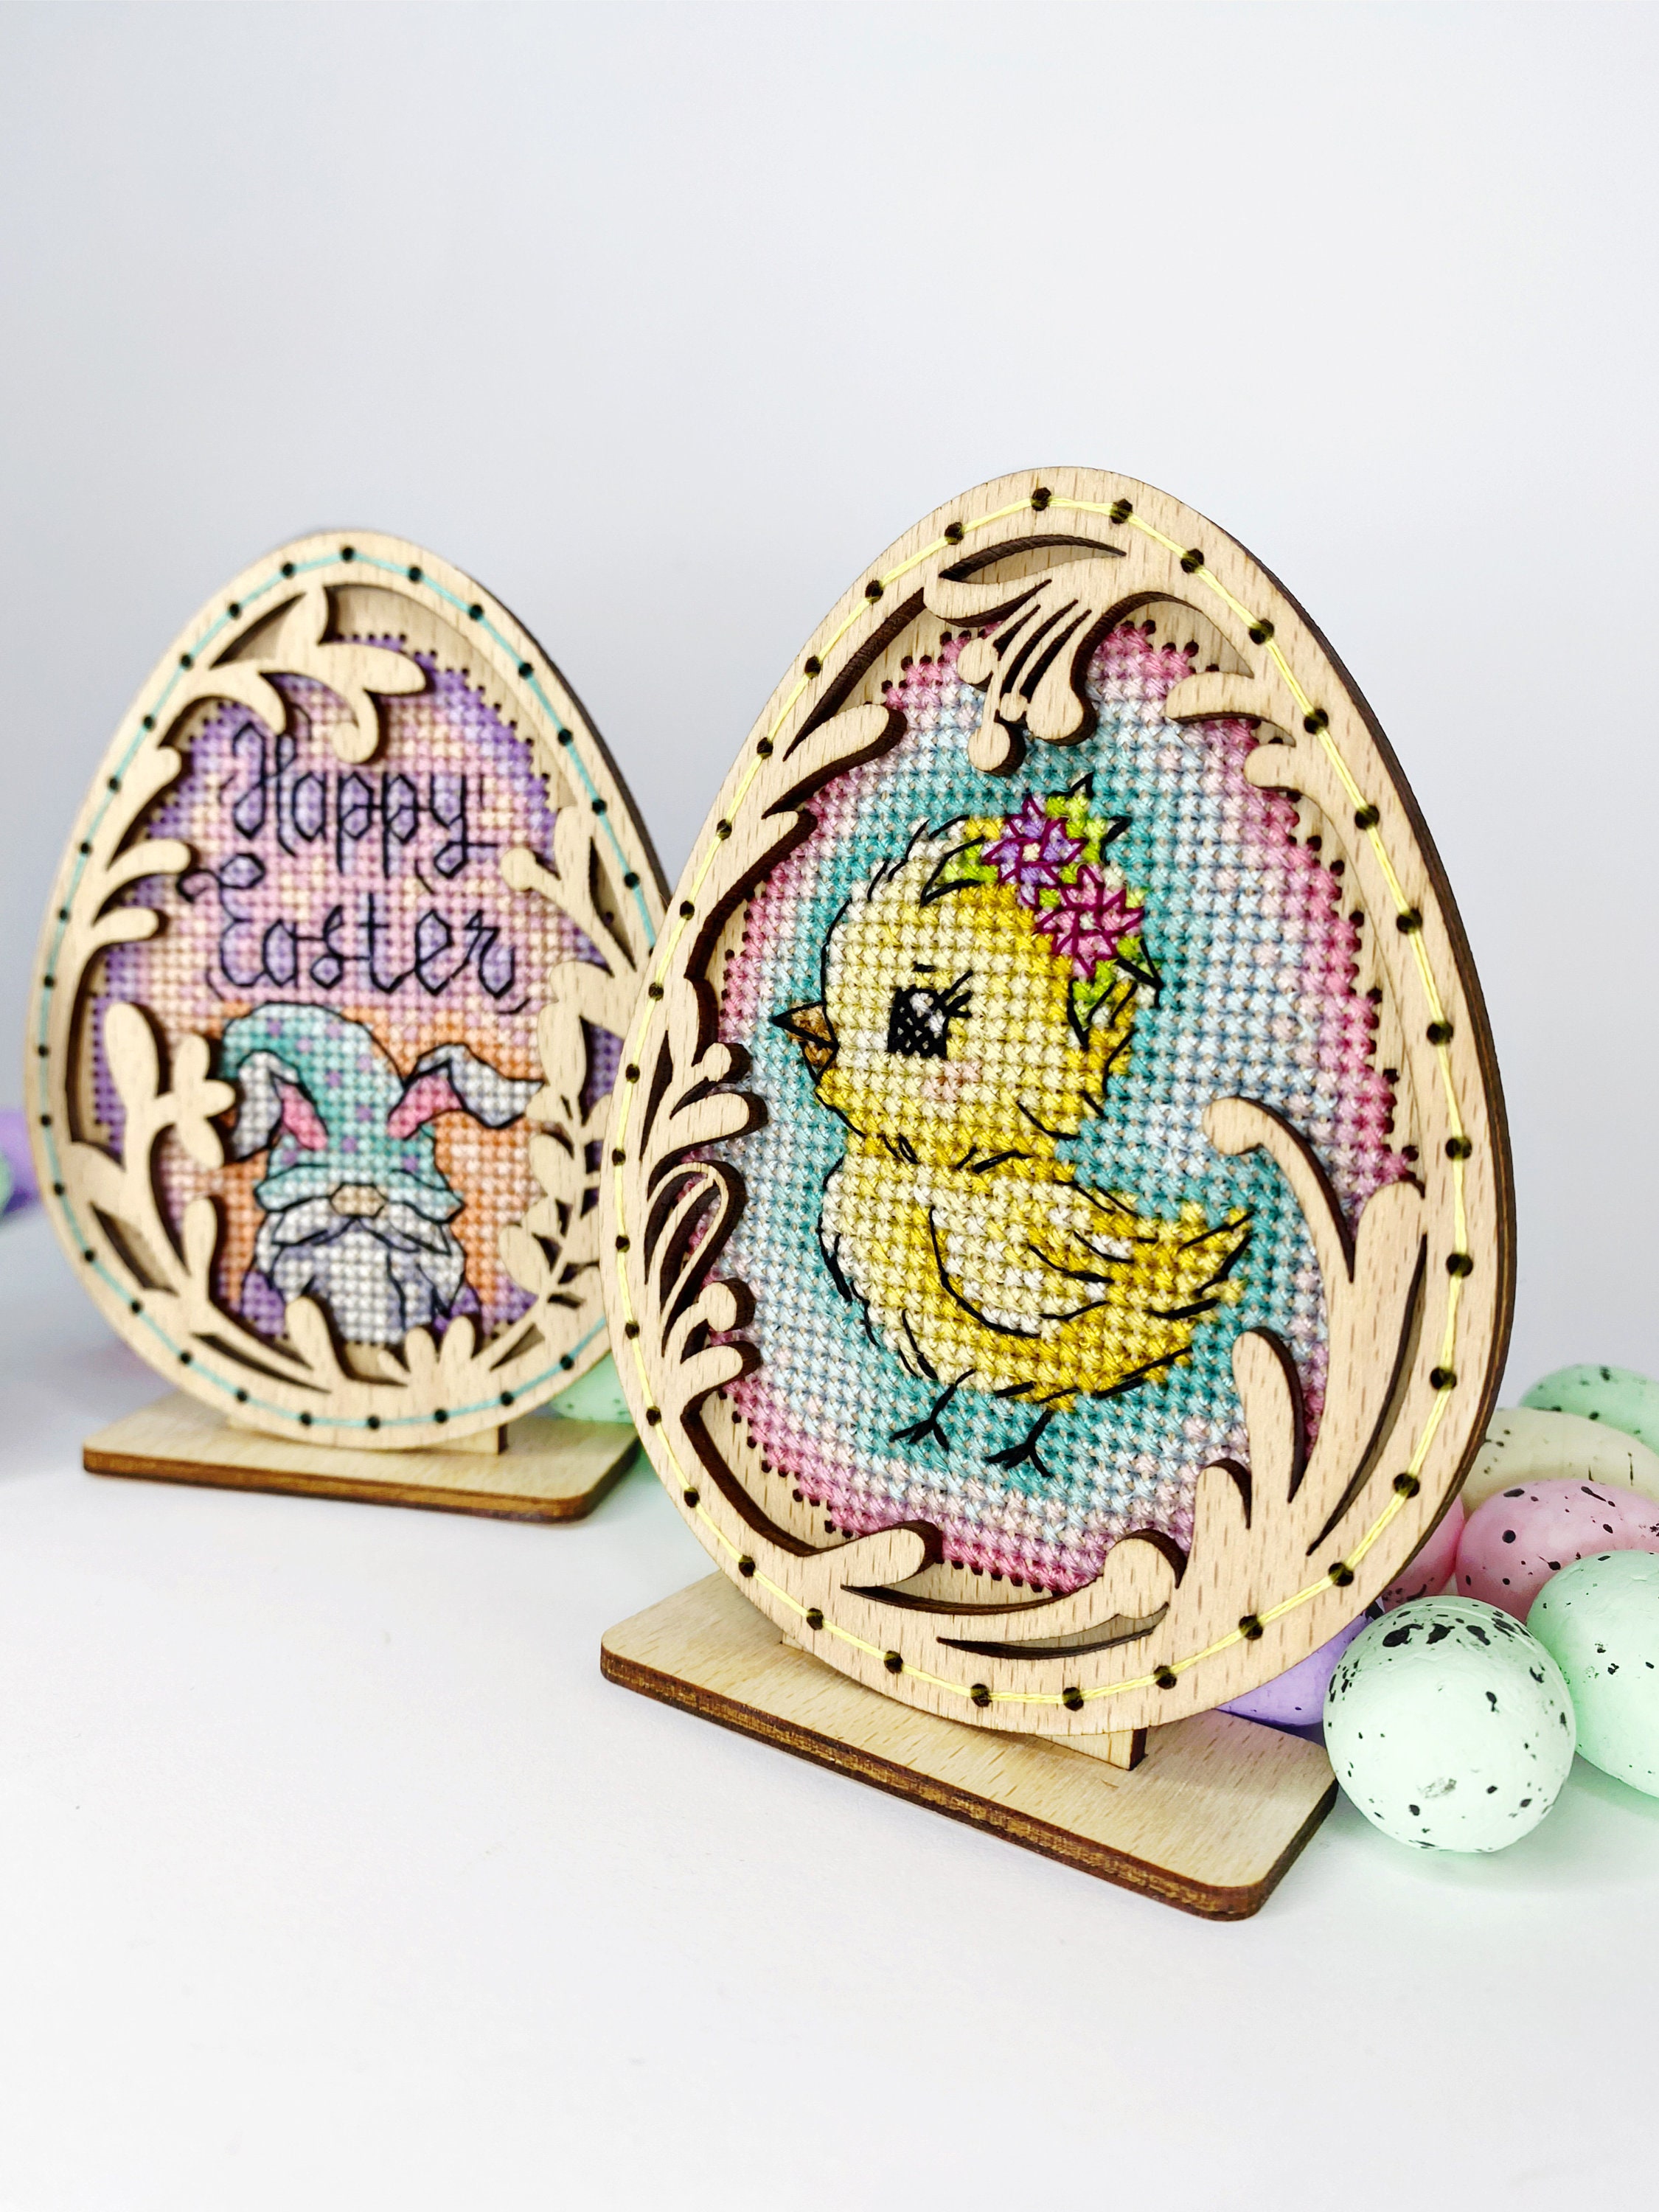 1x Easter and Christmas Themed Mini Cross Stitch Kits - Choose Your Design